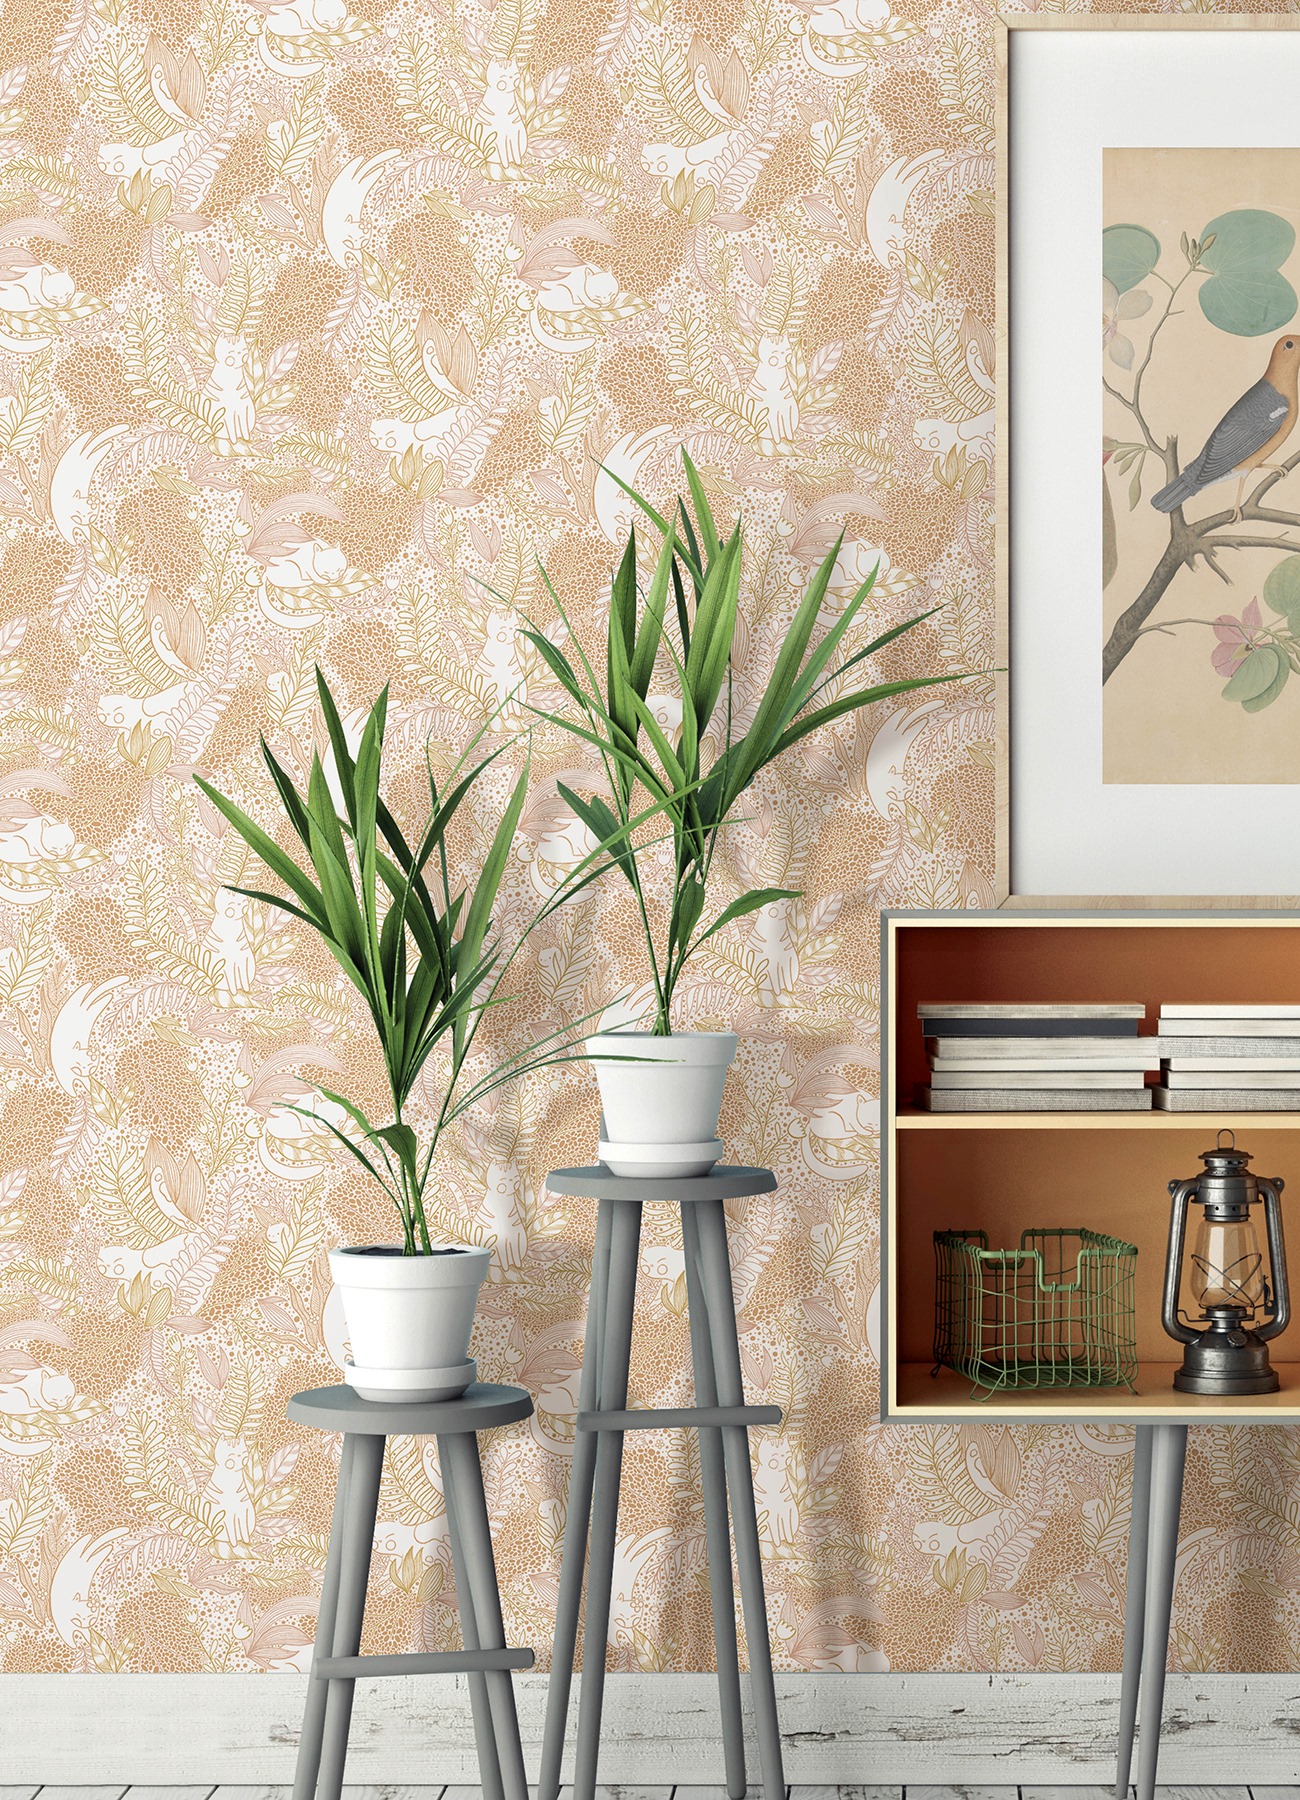 Bring a whimsical touch of cuteness to any space with this botanical print! Curious white kittens explore a bright and cheery yellow gardenscape. Botanical Terracotta Gato Garden Novelty Peel and Stick Wallpaper comes on one roll that measures 20.5 inches wide by 18 feet long.